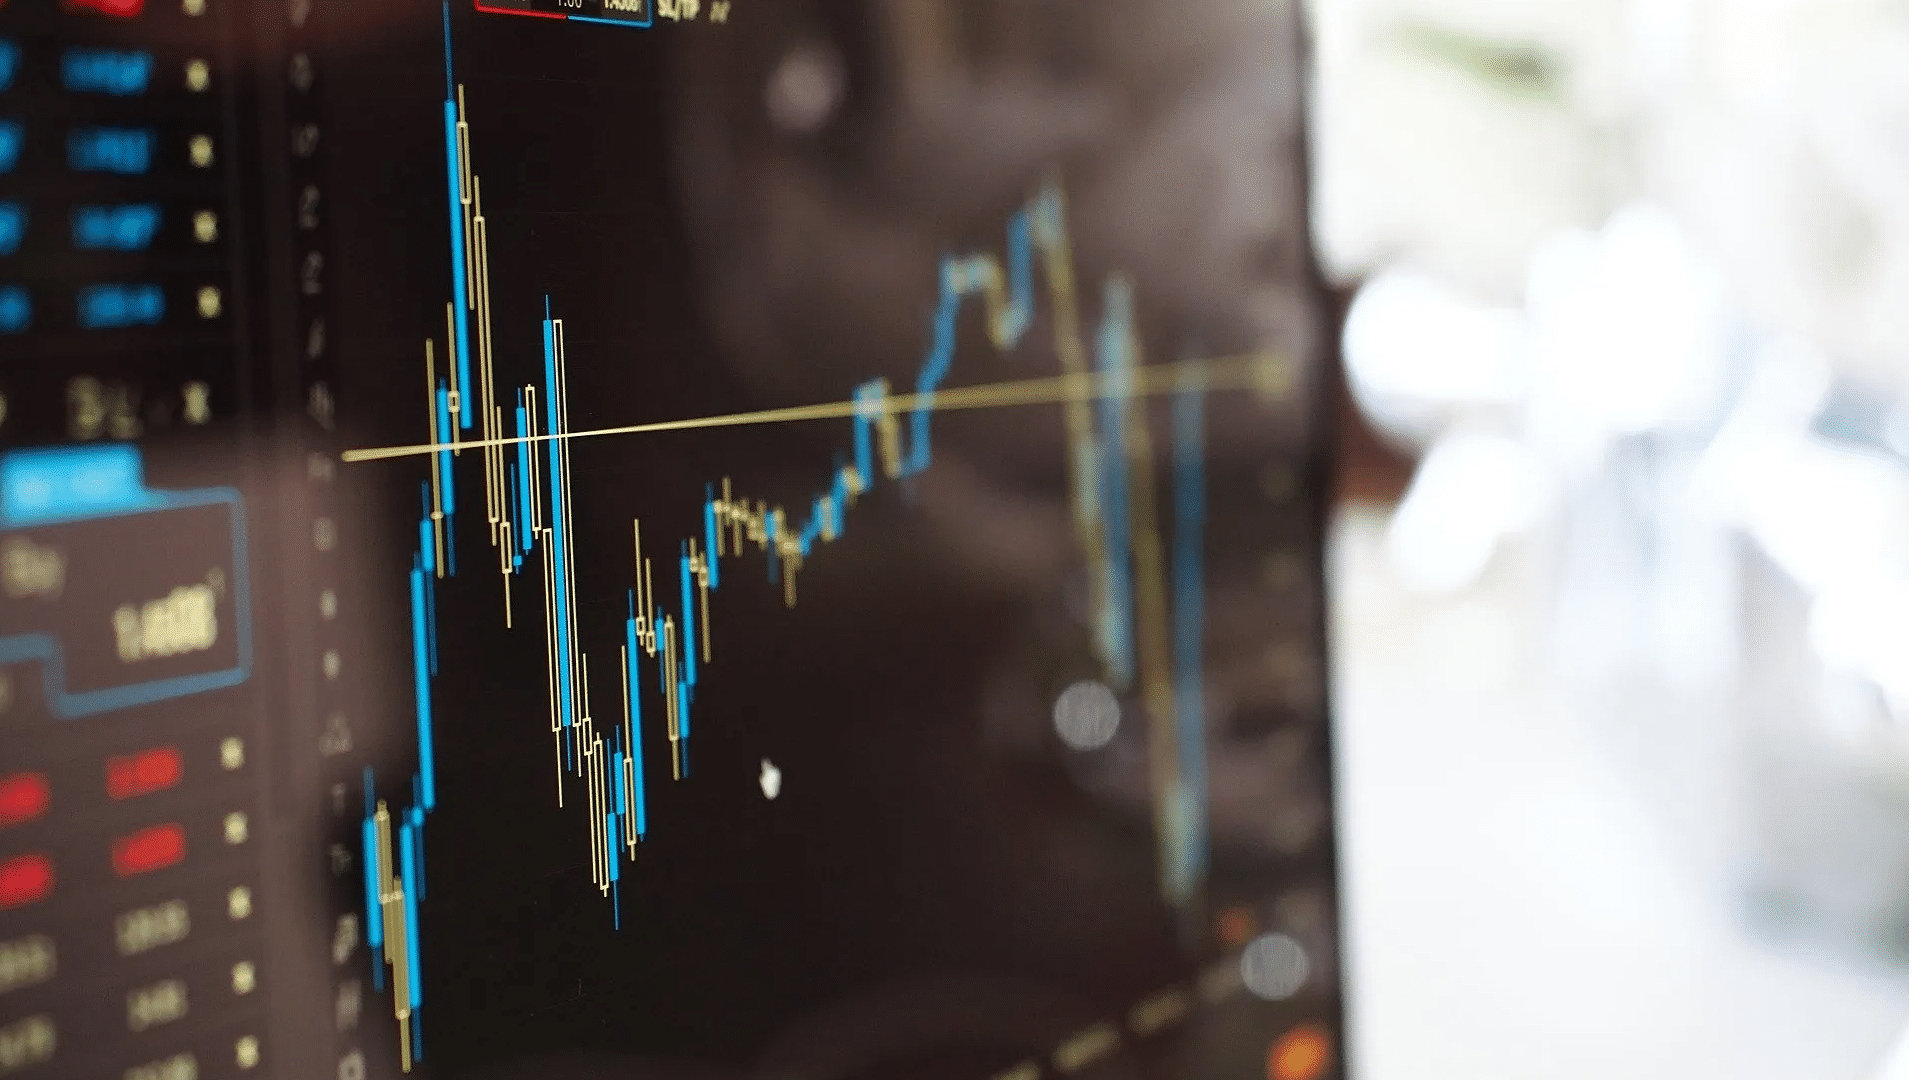 SBI, Eicher Motors, ACC and other stocks that moved most on May 16